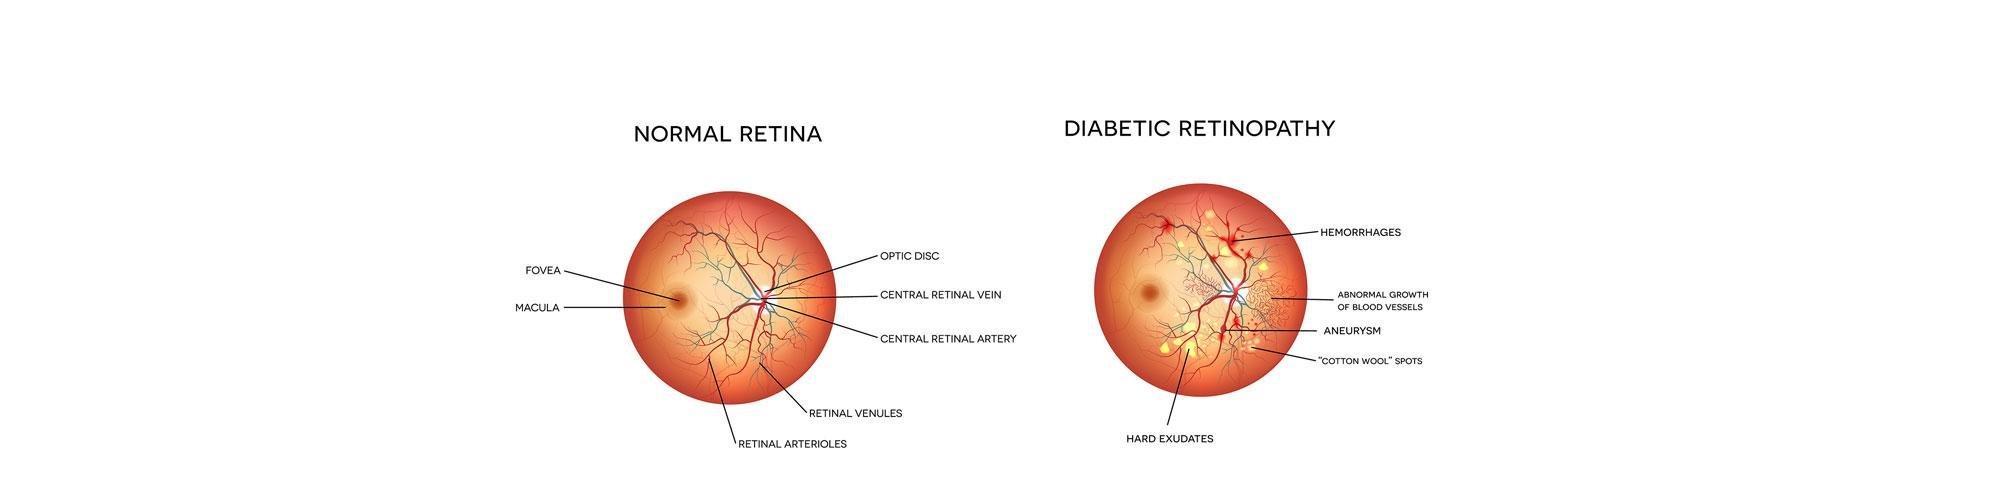 What Are The Four Stages Of Diabetic Retinopathy ...